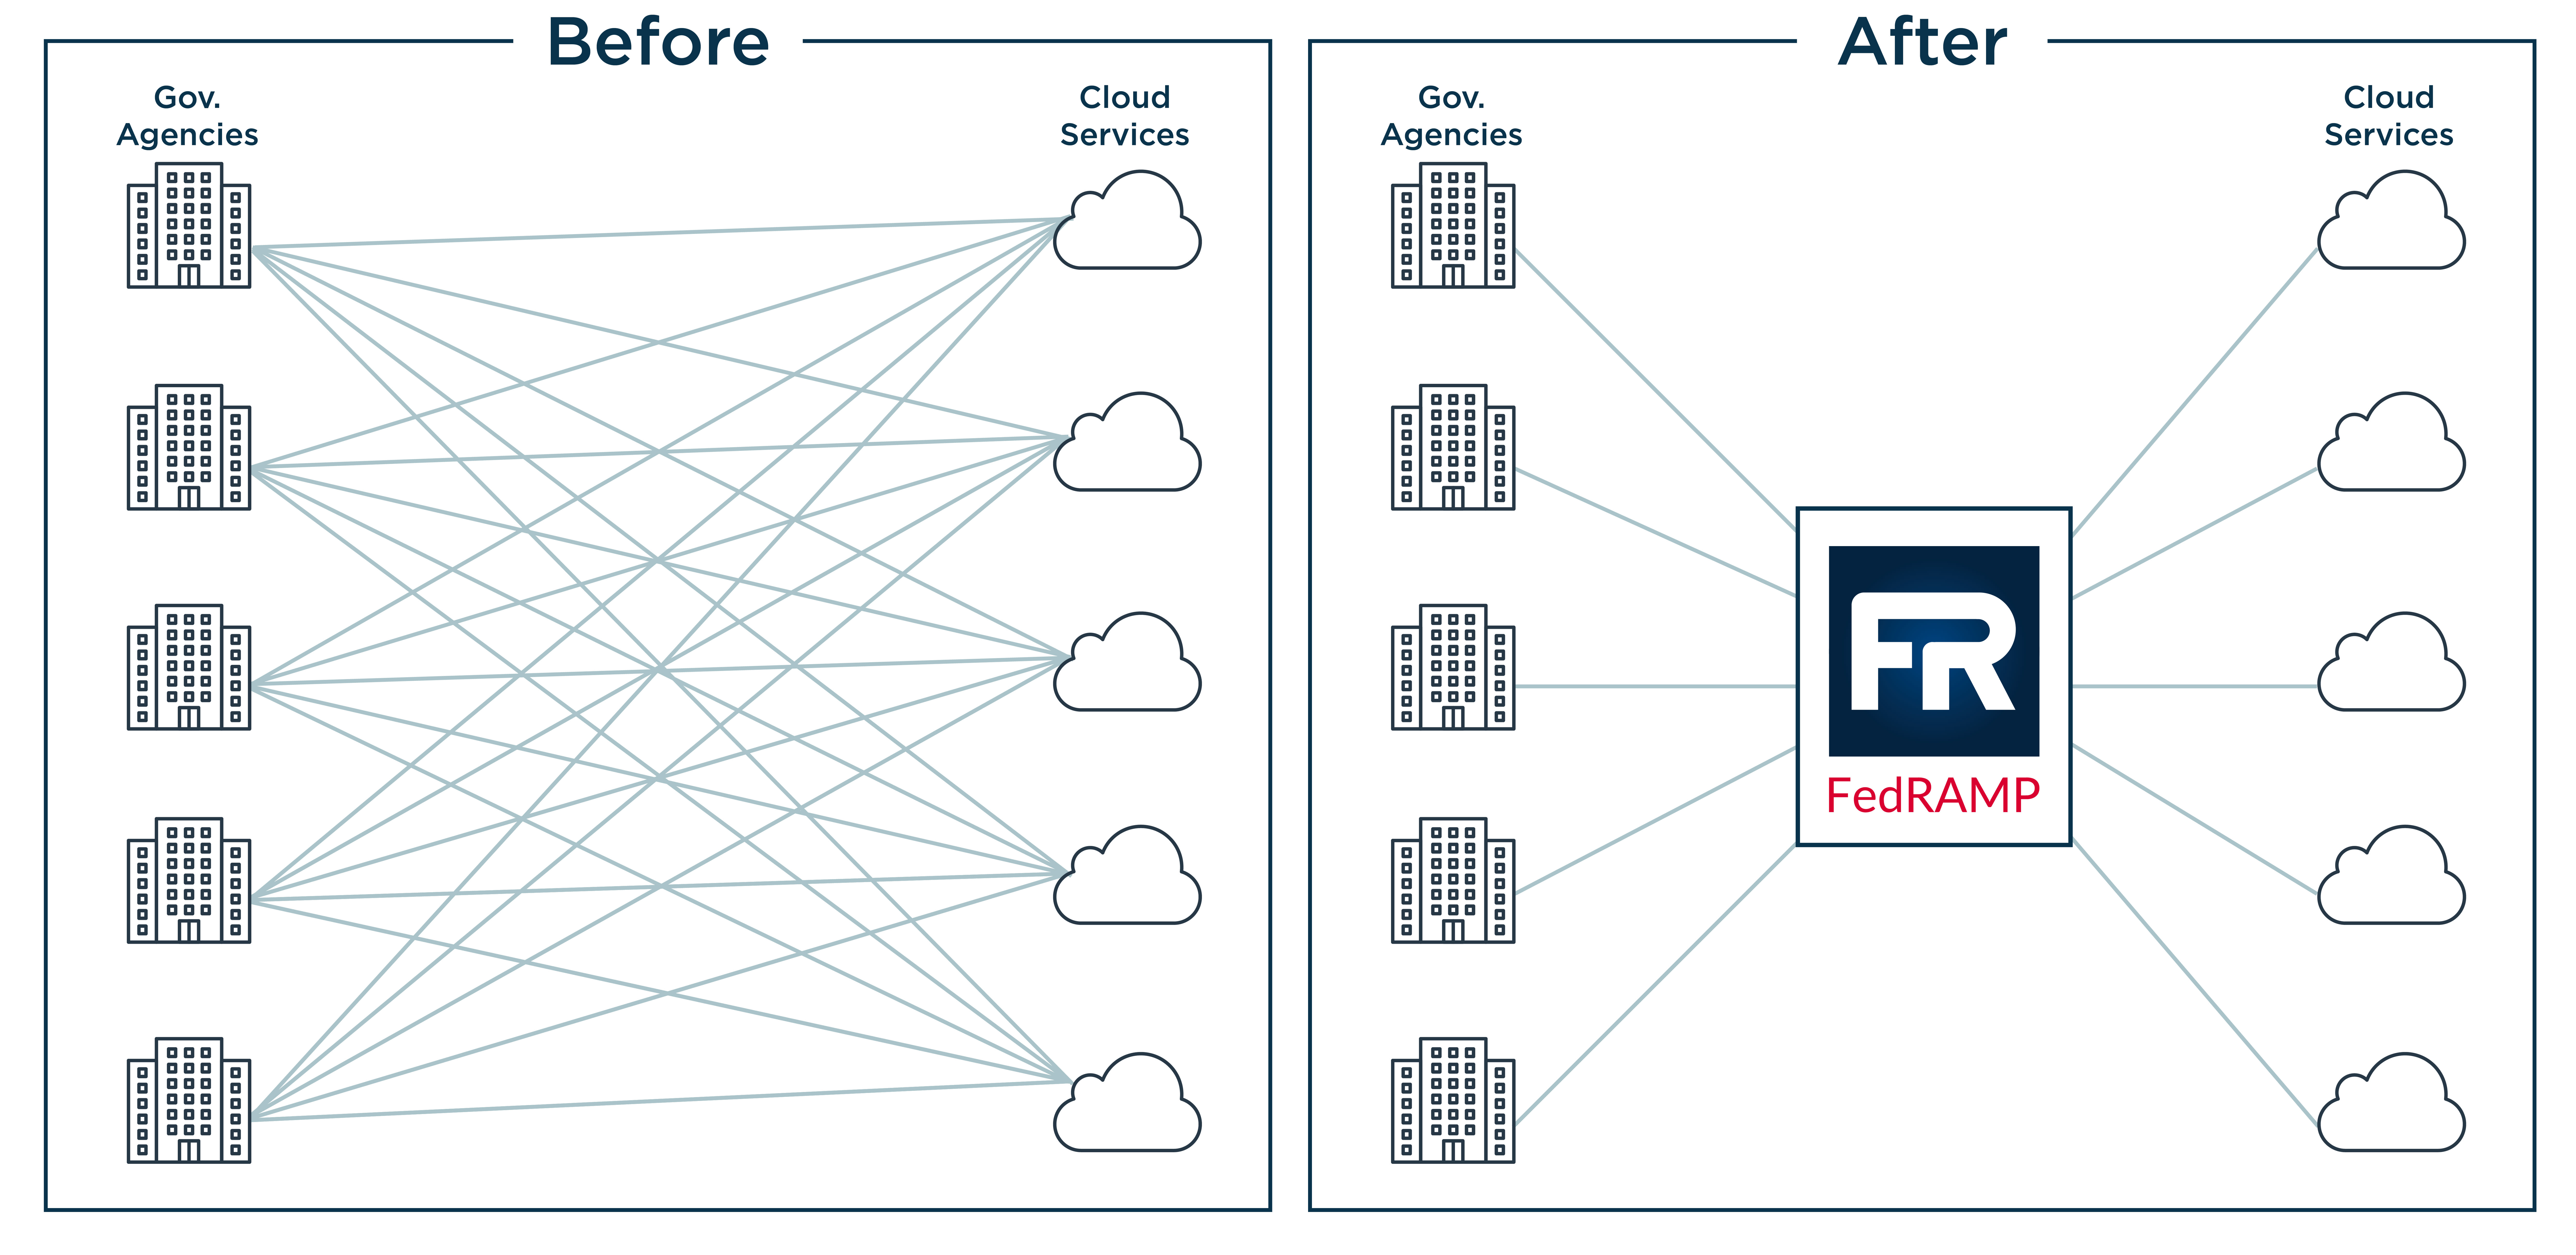 FedRAMP promotes the adoption of secure cloud services